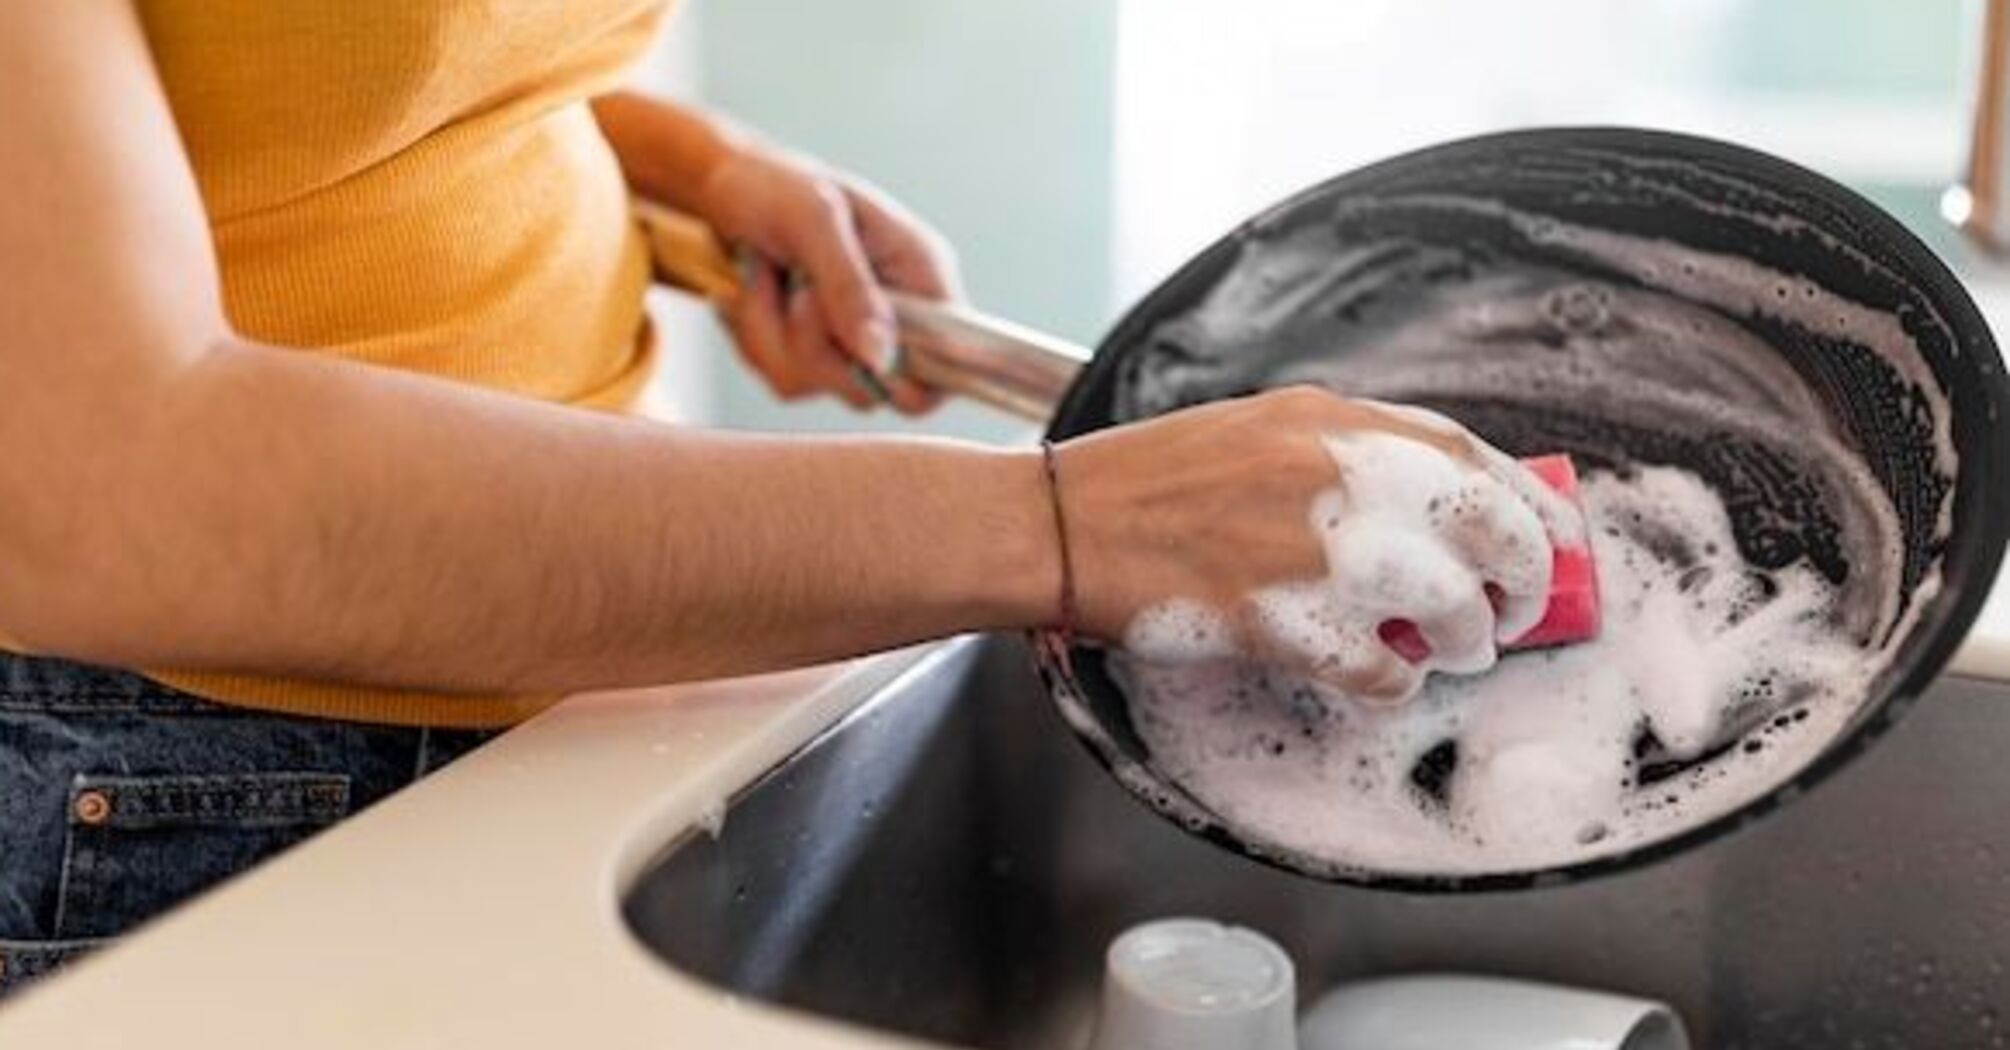 How to clean a dirty frying pan without chemicals: Useful tips